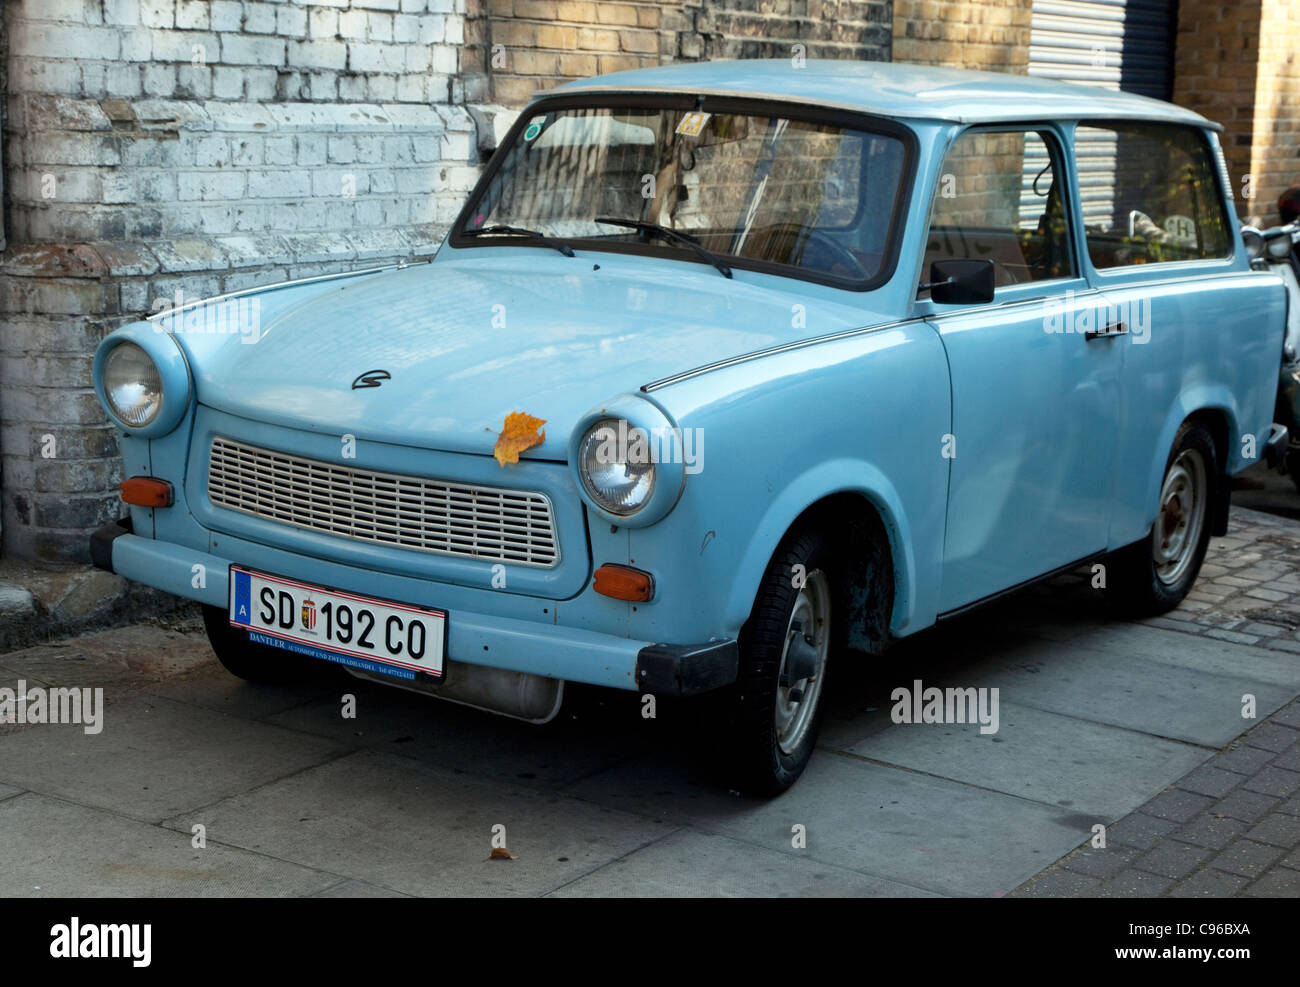 Trabant car made in East Germany photographed in London Stock Photo